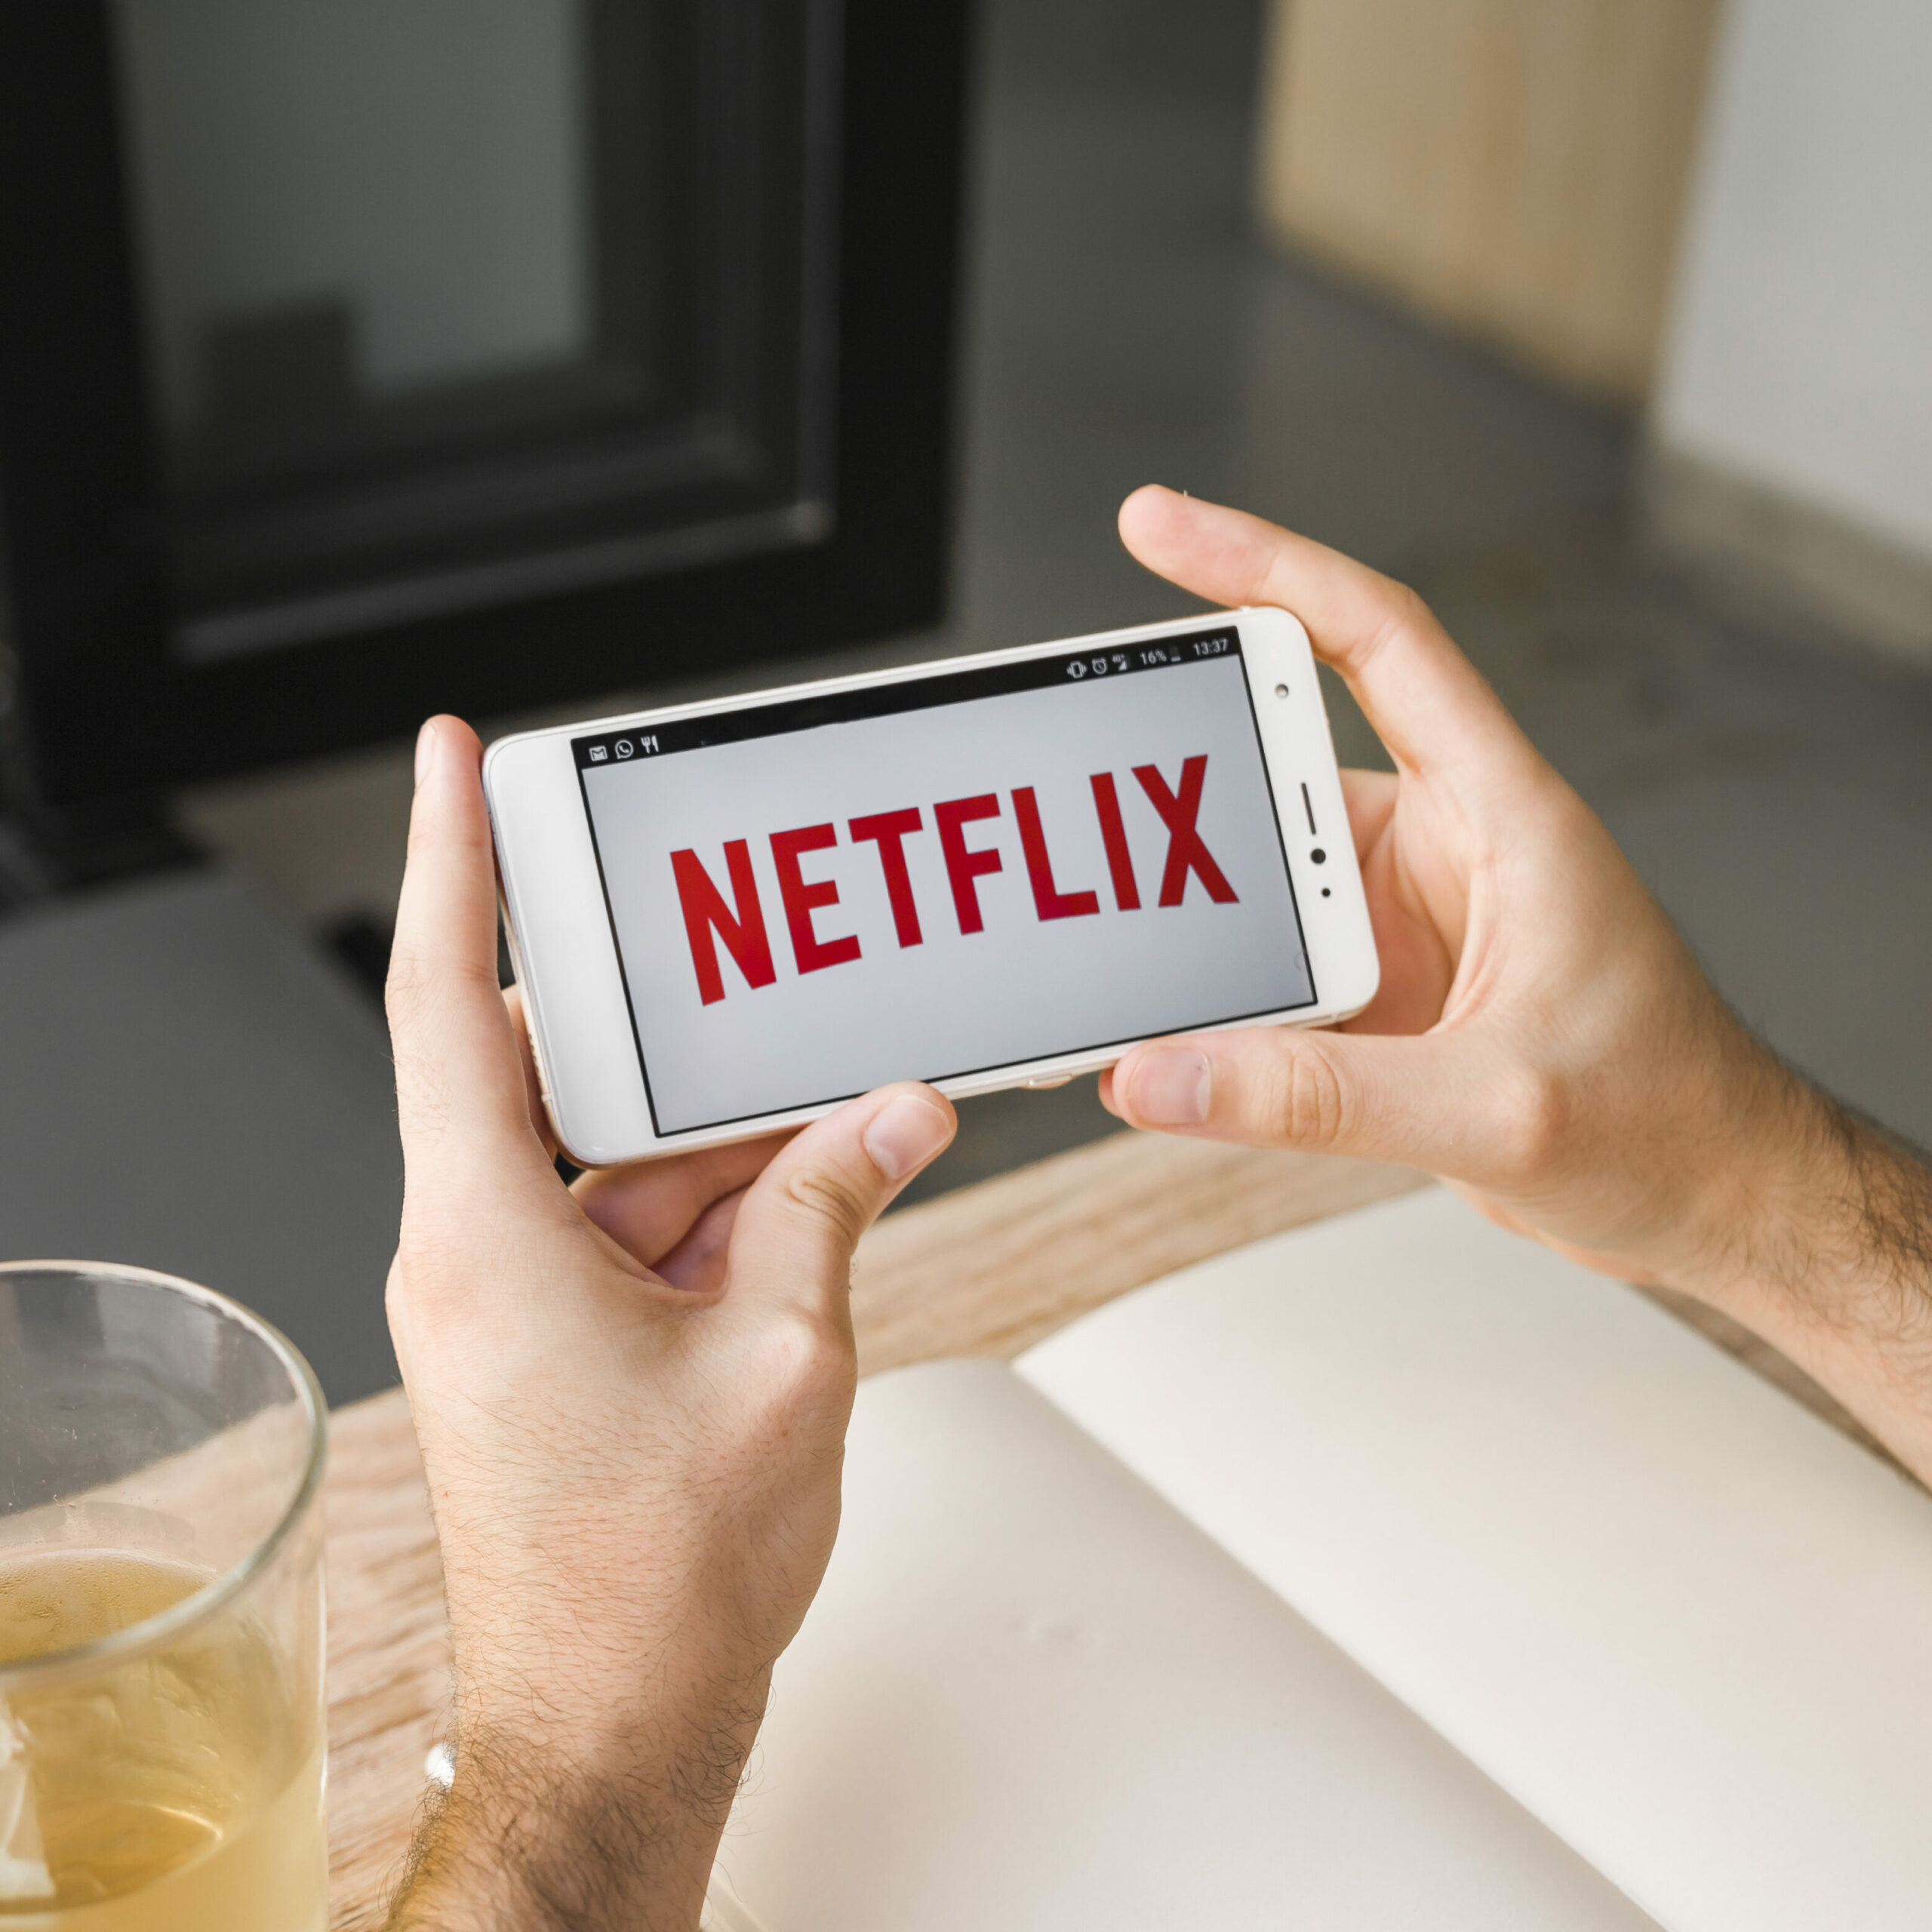 Netflix application on phone to introduce its localization campaign